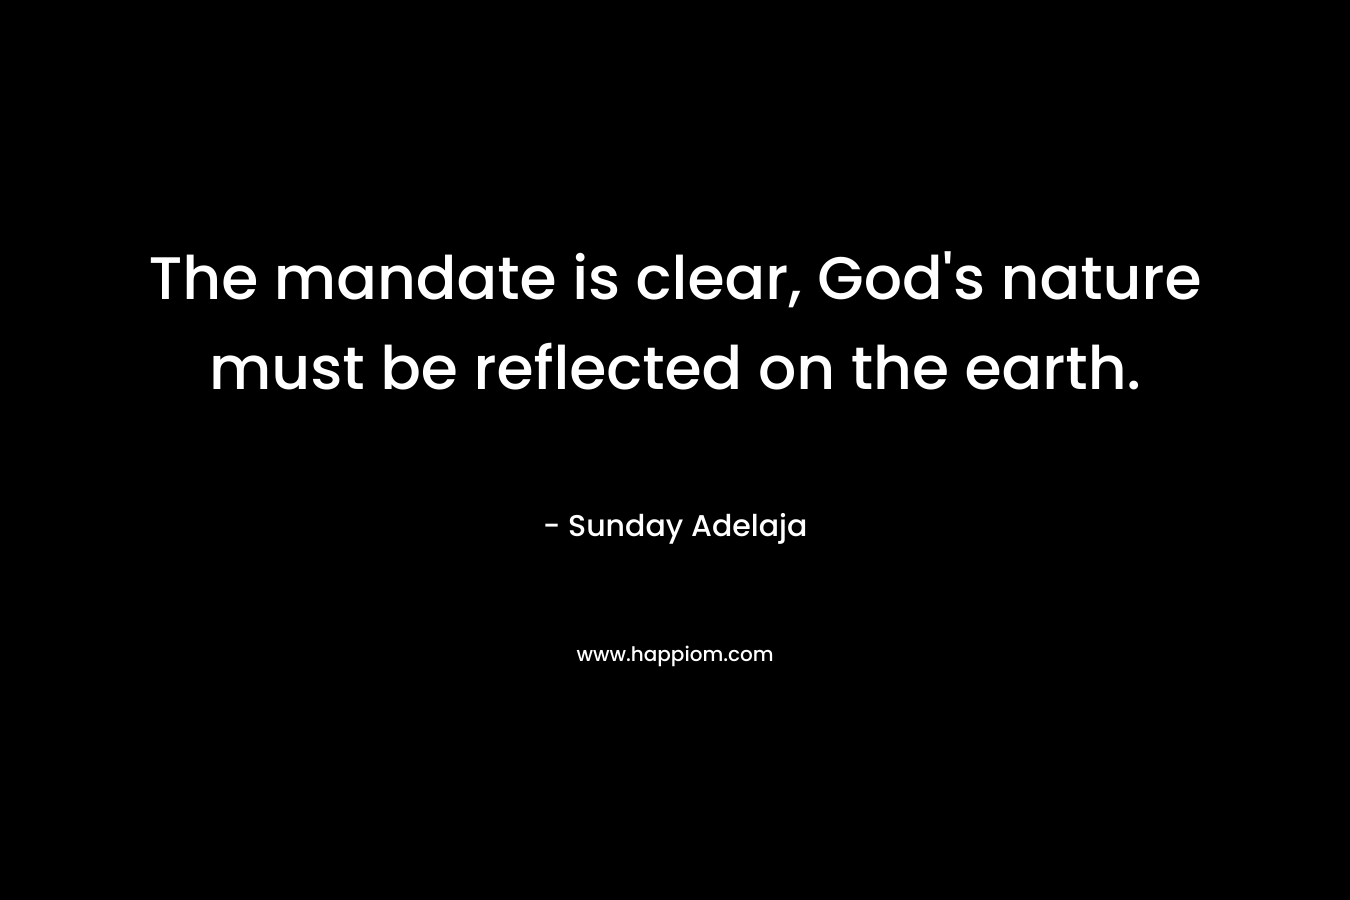 The mandate is clear, God's nature must be reflected on the earth.